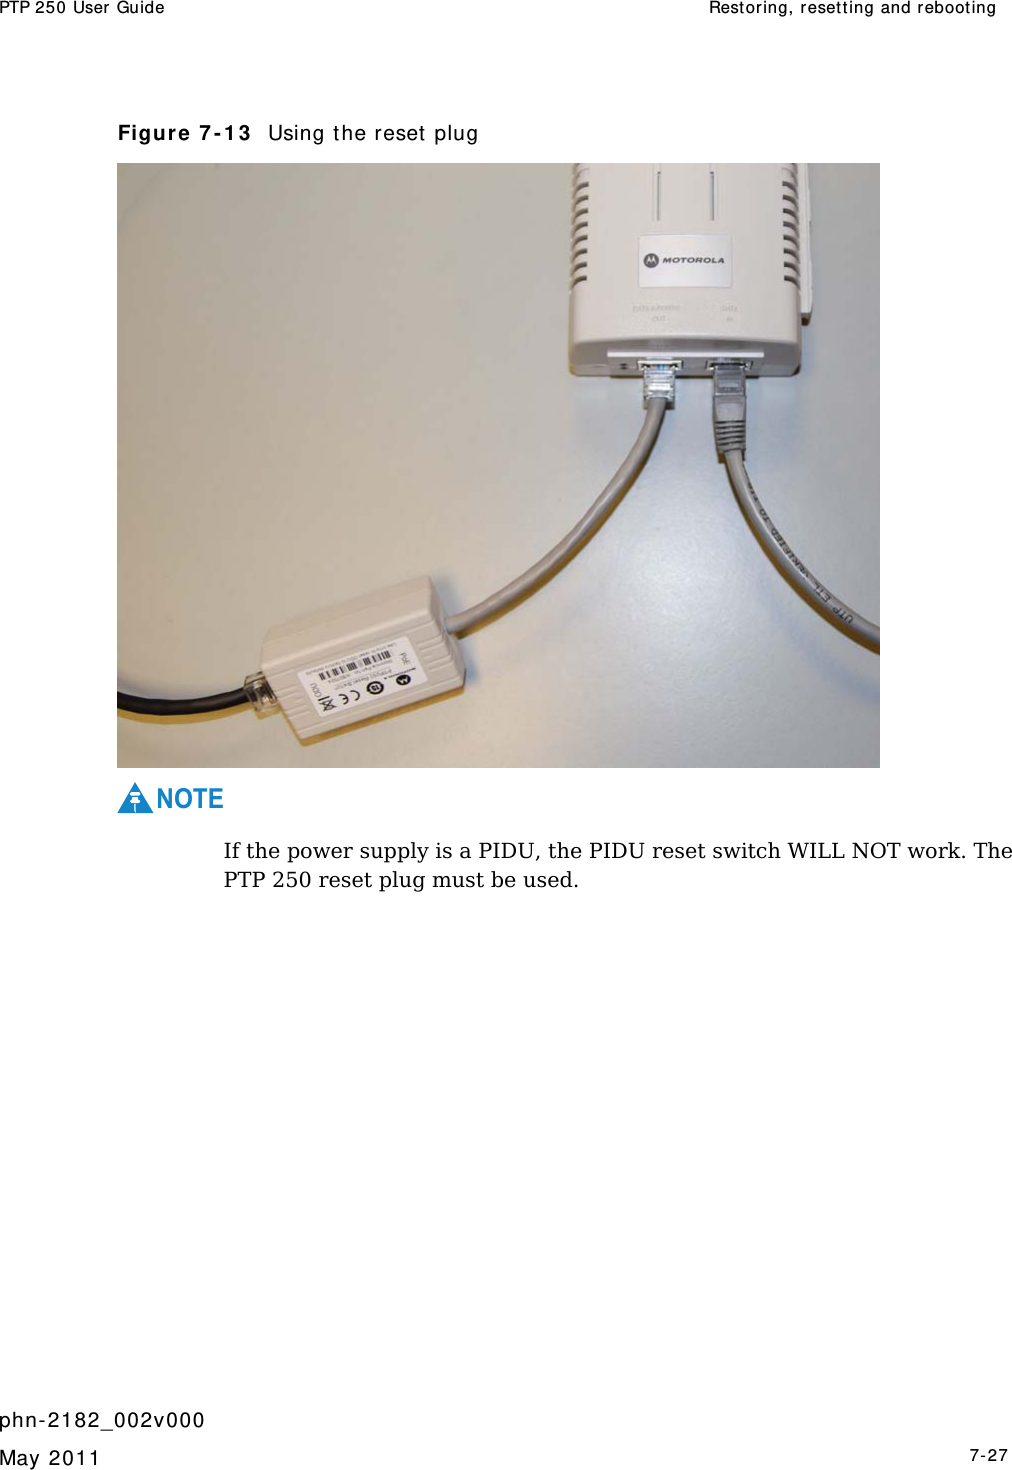 PTP 250 User Guide  Restor ing, reset t ing and rebooting   phn- 2182_002v000   May 2011   7-27  Figure 7 - 1 3   Using t he reset plug  NOTE  If the power supply is a PIDU, the PIDU reset switch WILL NOT work. The PTP 250 reset plug must be used.    